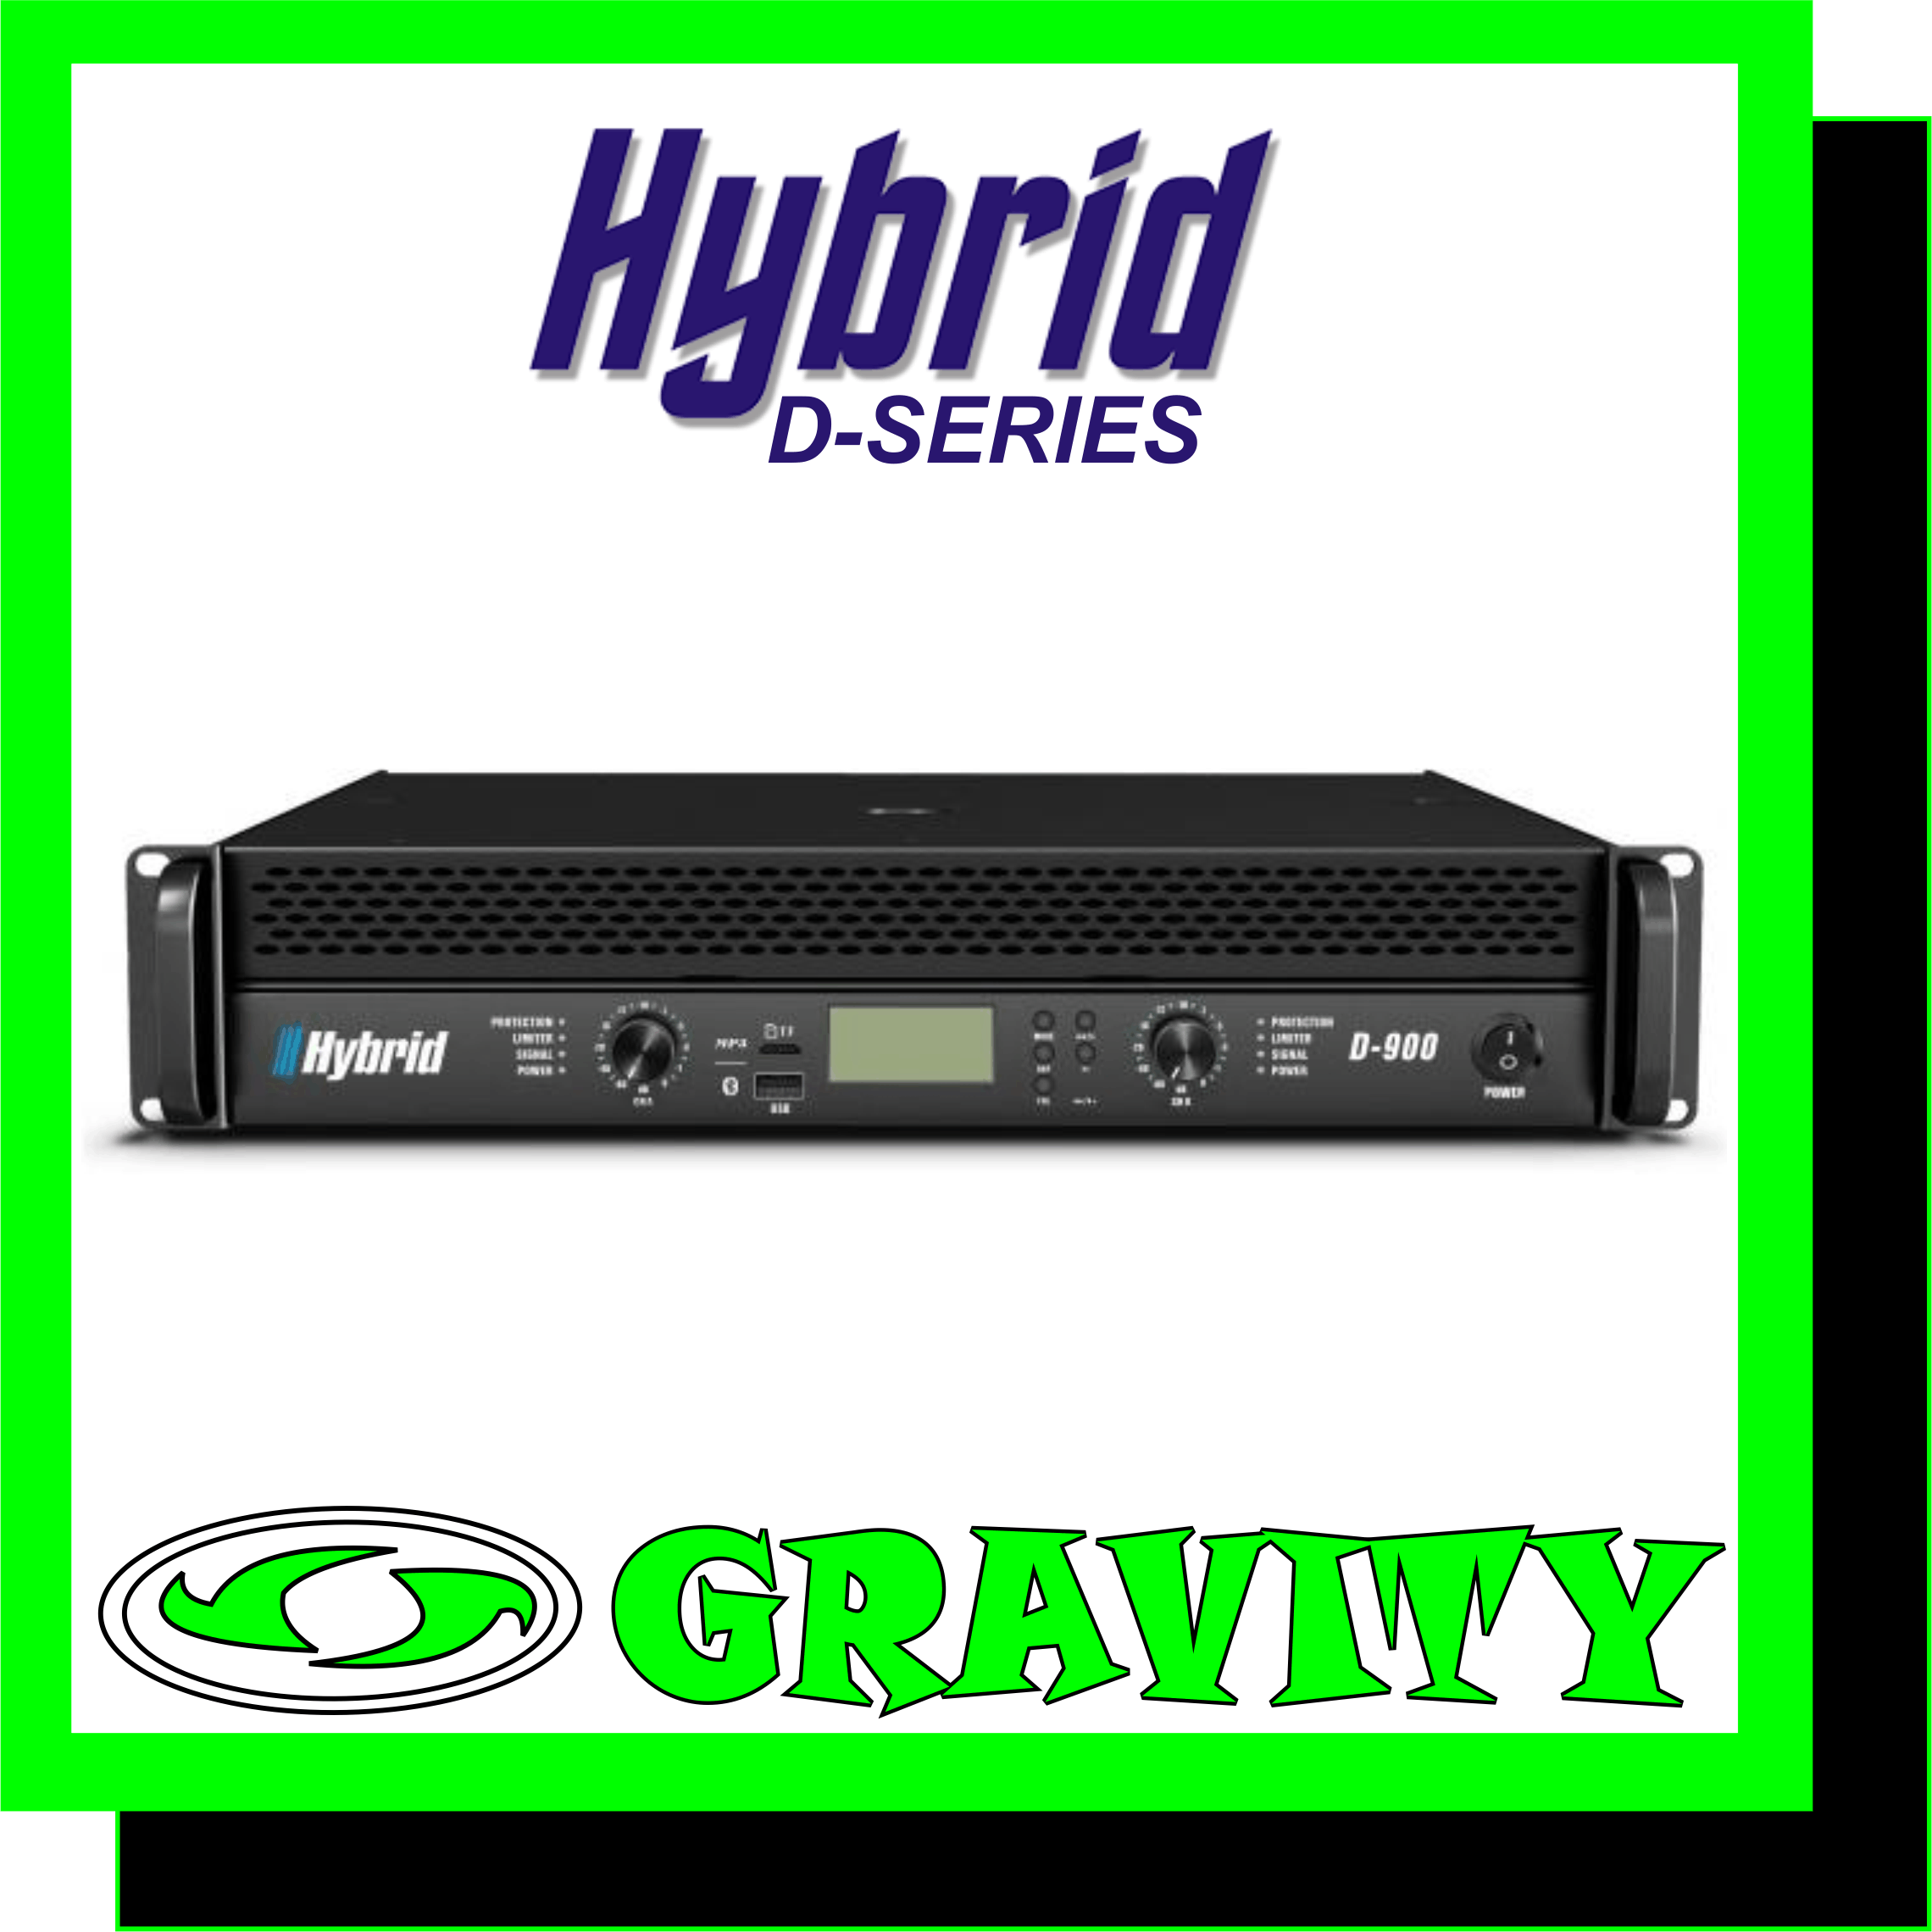 Hybrid D900 2X450W with X-over - MP3 - Bluetooth   8Ohm Stereo Power . RMS/CH 290W 4Ohm Stereo Power . RMS/CH 430W 8Ohm Bridged Mono Power . RMS 860W  Frequency Response ( 1W/8O) 20Hz 20KHz +/- 3dB Protection DC Protection . Short Circuit Protection . Thermal Protection . Inrush Current Protection . Soft Start Portection . Input & Overload Protection THD+N (20Hz-20KHz) <0.1% Damping Factor (1KHz @ 8O) >300 Hum & Noise(A weighted . -80dBW) 95dB Input Impedance (Balanced / Unbalanced) 20K Ohm / 10K Ohm Crosstalk (20Hz-20KHz Rated Power 8O) >60dB Cooling 2 x Fans . Dual speed . Front to Rear Airflow  Input Connectors Jack/Female XLR Neutrik Combo + Male XLR Neutrik Output Connectors 3x Neutrik Speakon Dimensions (WxHxD) mm 483 x 88 x 430 Weight Kg 16